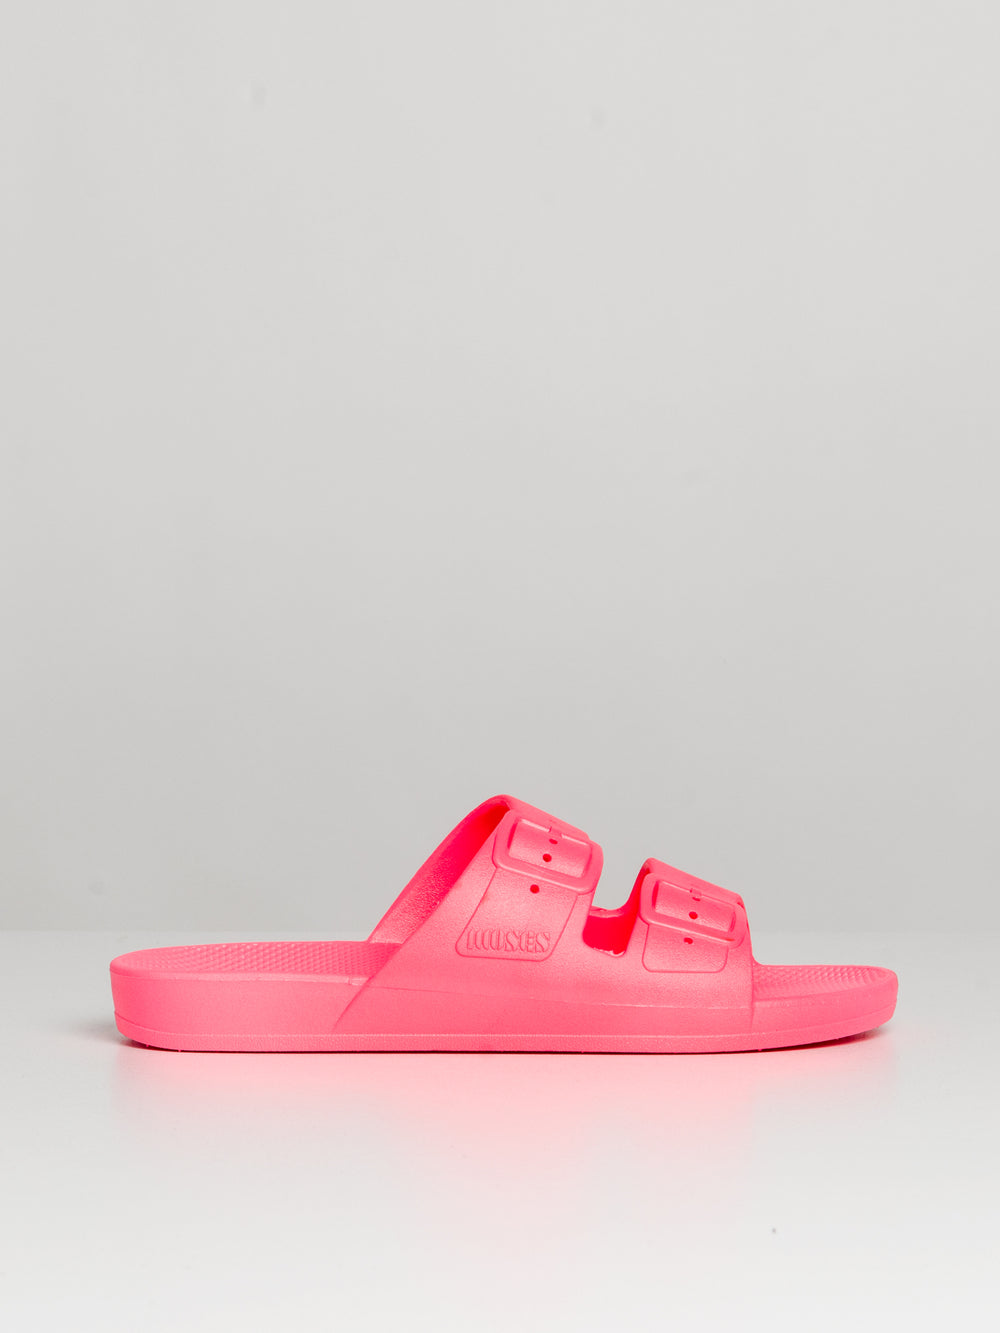 WOMENS FREEDOM MOSES FREEDOM GLOW PINK SANDAL - CLEARANCE